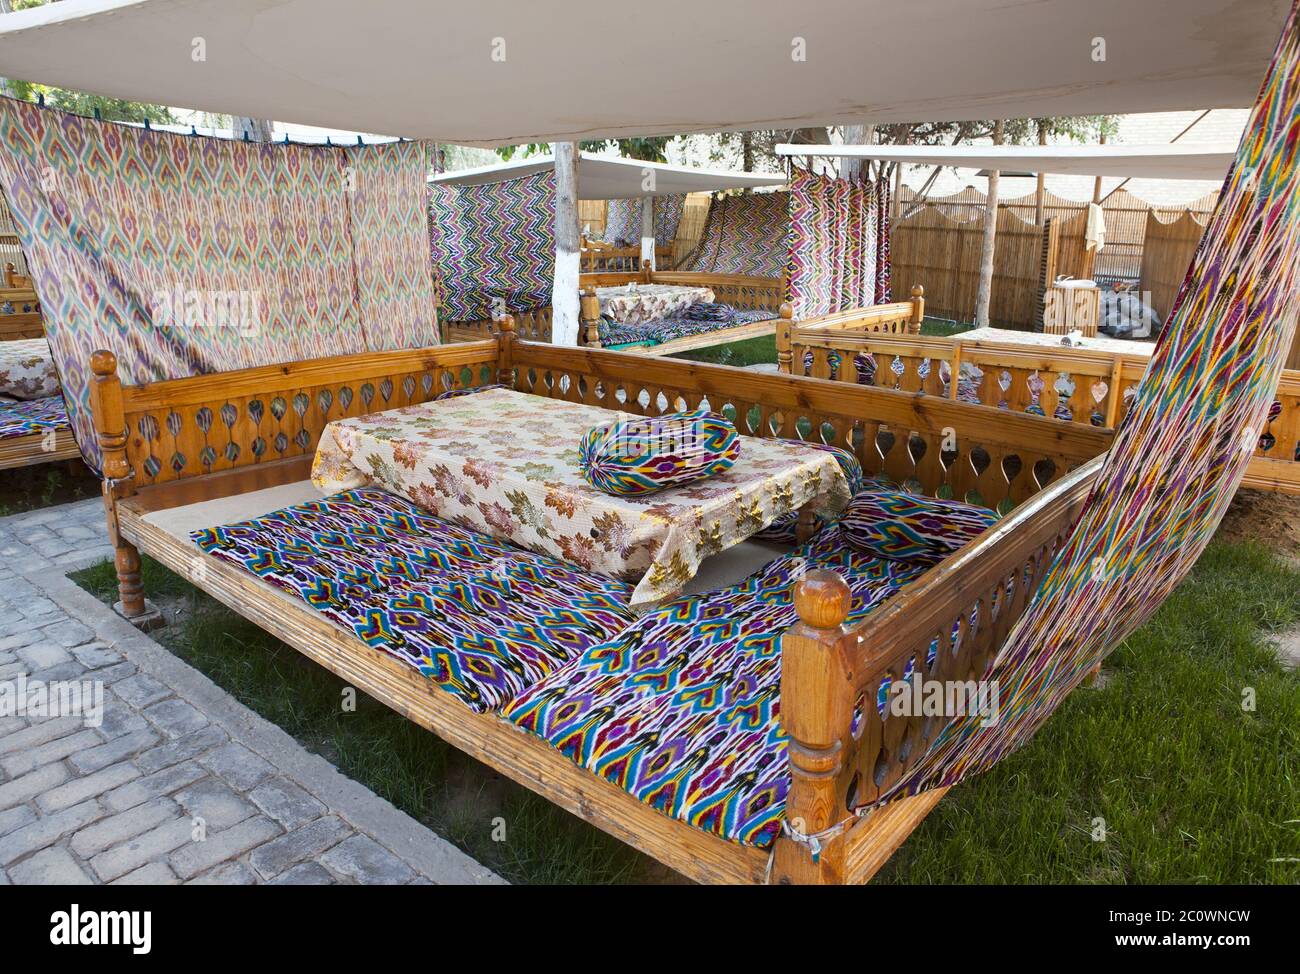 national beds for the traditional local cuisine eating. Uzbekistan. Stock Photo